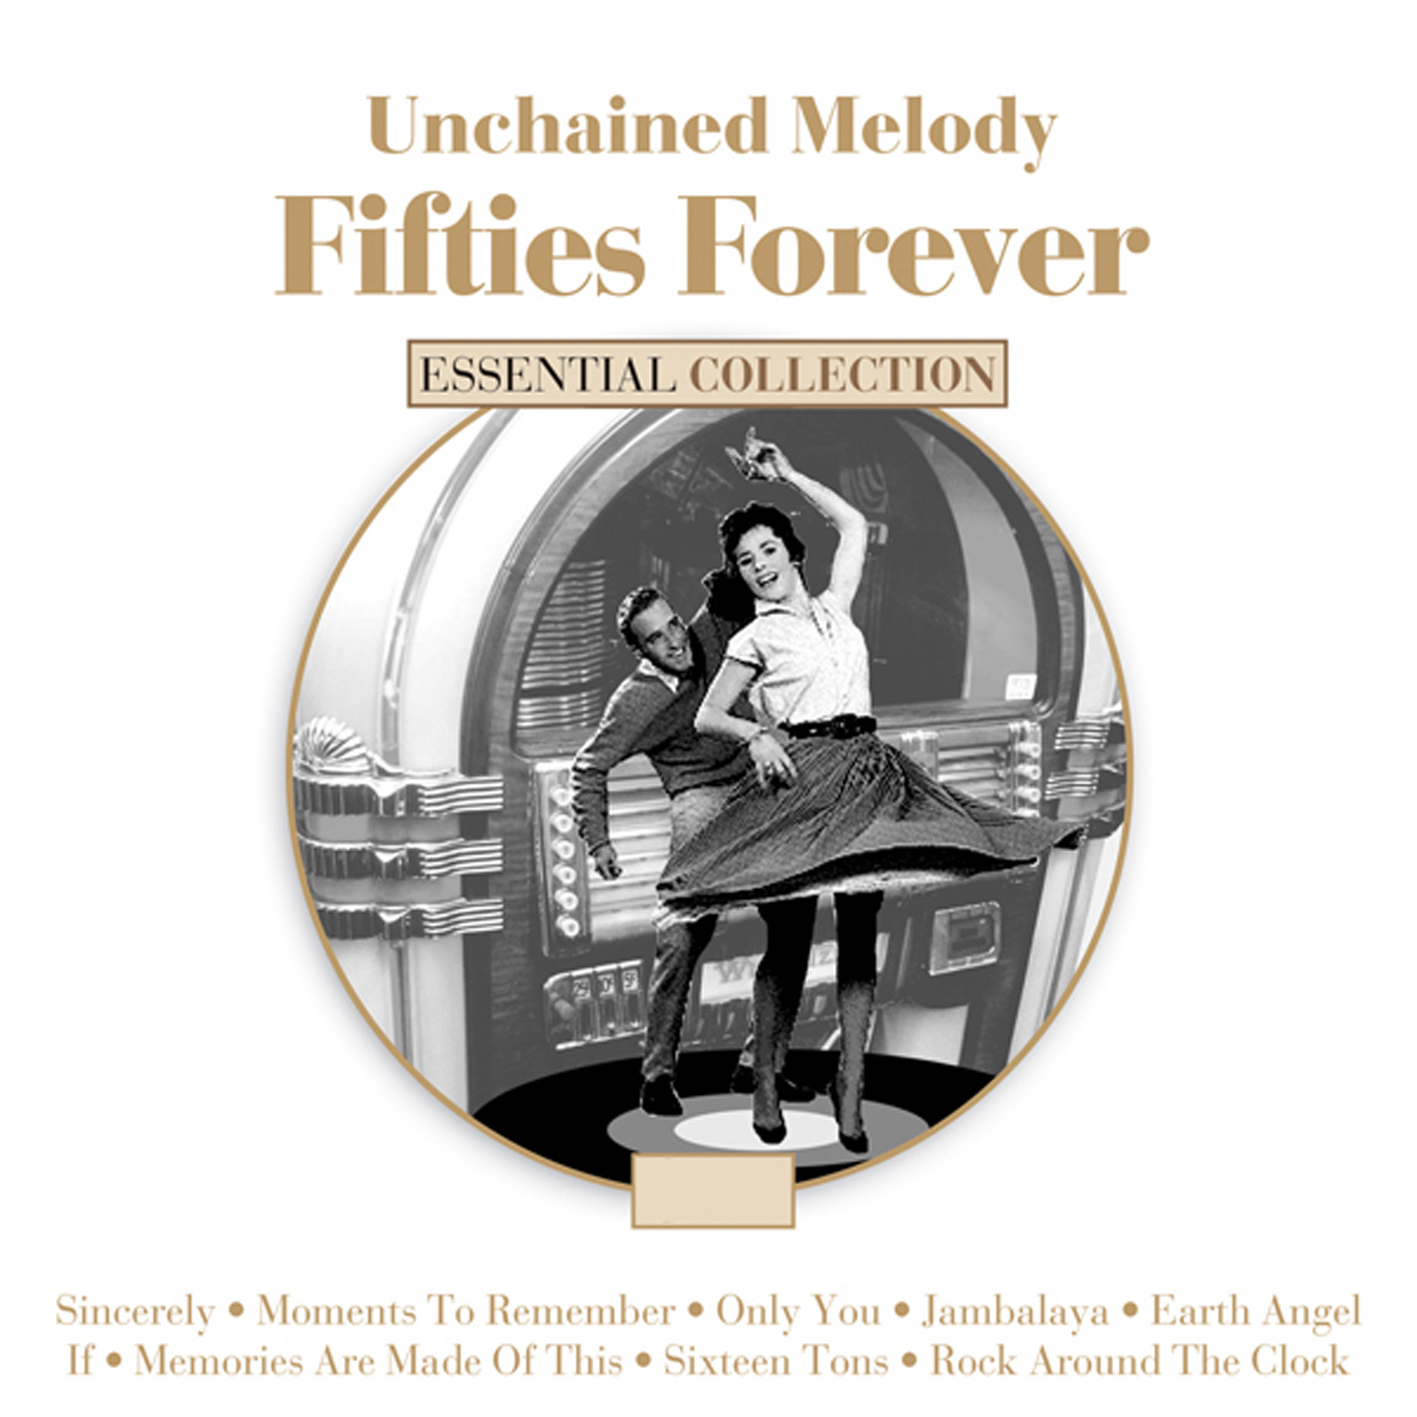 Unchained Melody - Fifties Forever